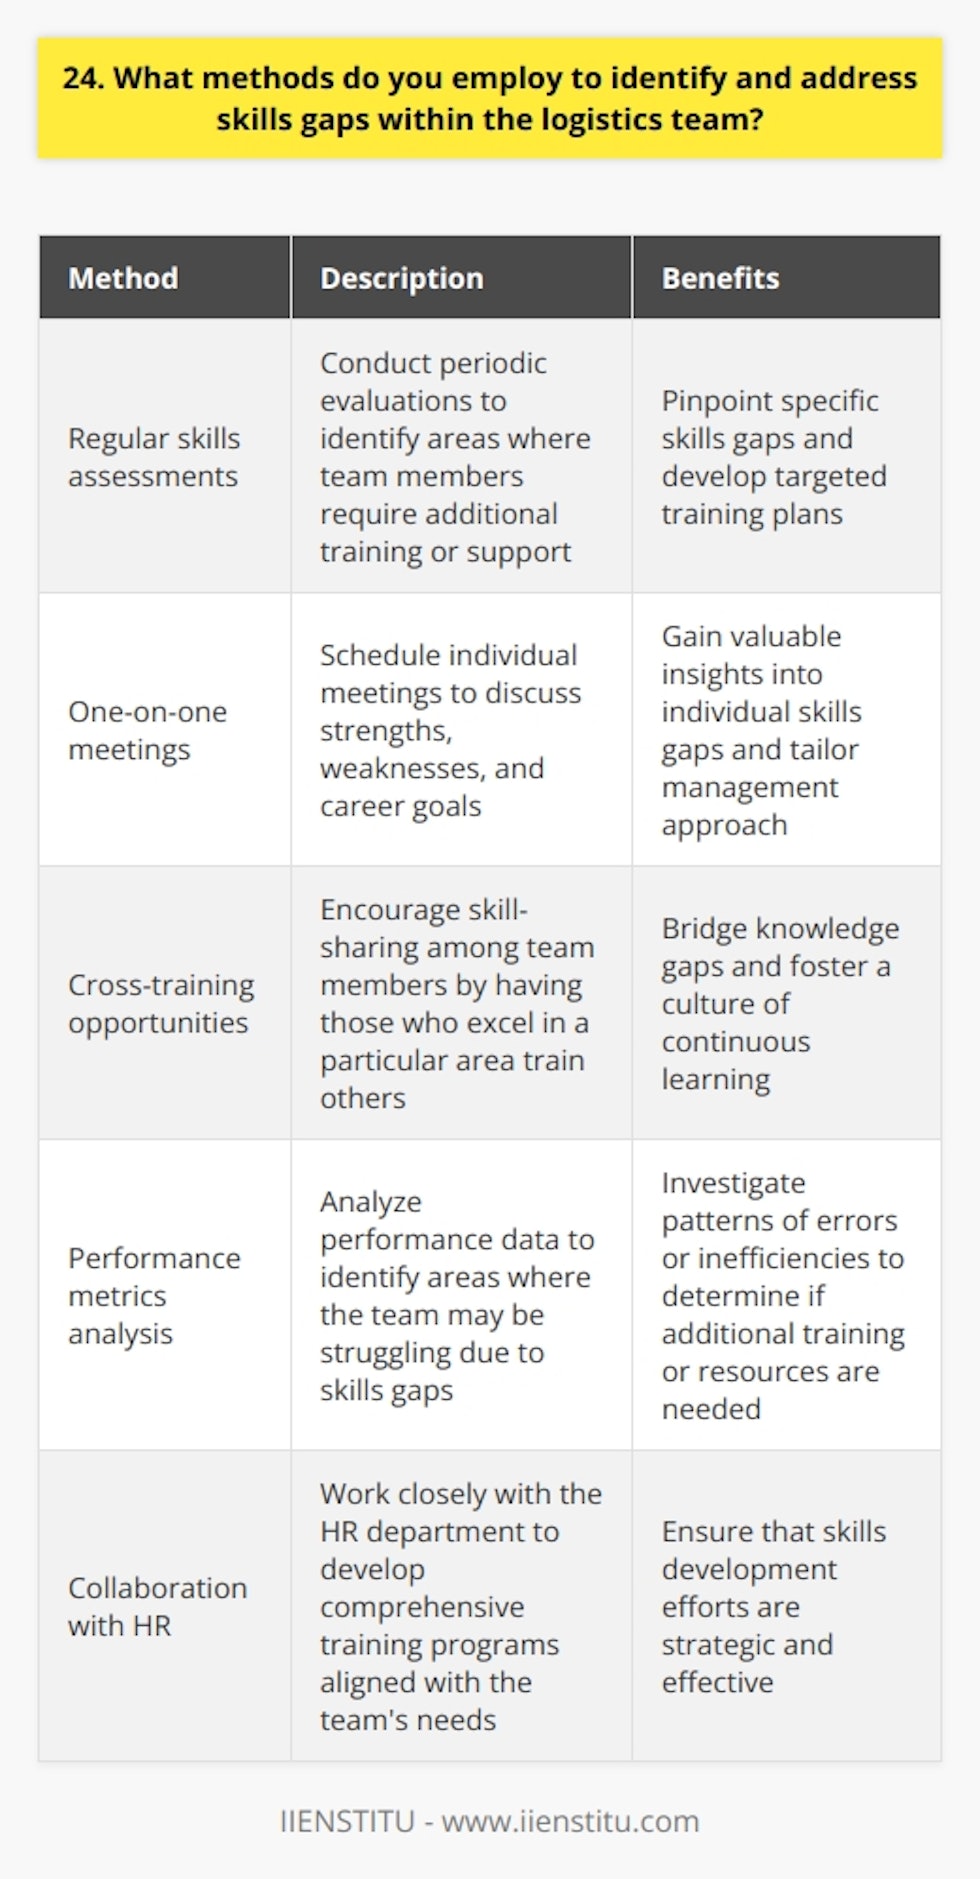 I employ several methods to identify and address skills gaps within the logistics team: Regular skills assessments I conduct regular skills assessments to identify areas where team members may need additional training or support. These assessments help me pinpoint specific skills gaps and develop targeted training plans. One-on-one meetings I schedule one-on-one meetings with each team member to discuss their strengths, weaknesses, and career goals. These conversations provide valuable insights into individual skills gaps and help me tailor my management approach. Cross-training opportunities I encourage cross-training among team members to promote skill-sharing and address skills gaps. When a team member excels in a particular area, I ask them to train others, which helps bridge knowledge gaps and fosters a culture of continuous learning. Performance metrics analysis I analyze performance metrics to identify areas where the team may be struggling due to skills gaps. If I notice a pattern of errors or inefficiencies, I investigate further to determine if additional training or resources are needed. Collaboration with HR I work closely with our HR department to develop comprehensive training programs that align with our teams needs. By collaborating with HR, I can ensure that our skills development efforts are strategic and effective. Ultimately, my goal is to create a proactive, supportive environment where team members feel empowered to grow and succeed. By consistently identifying and addressing skills gaps, I help my team stay agile, adaptable, and equipped to handle any challenge that comes our way.